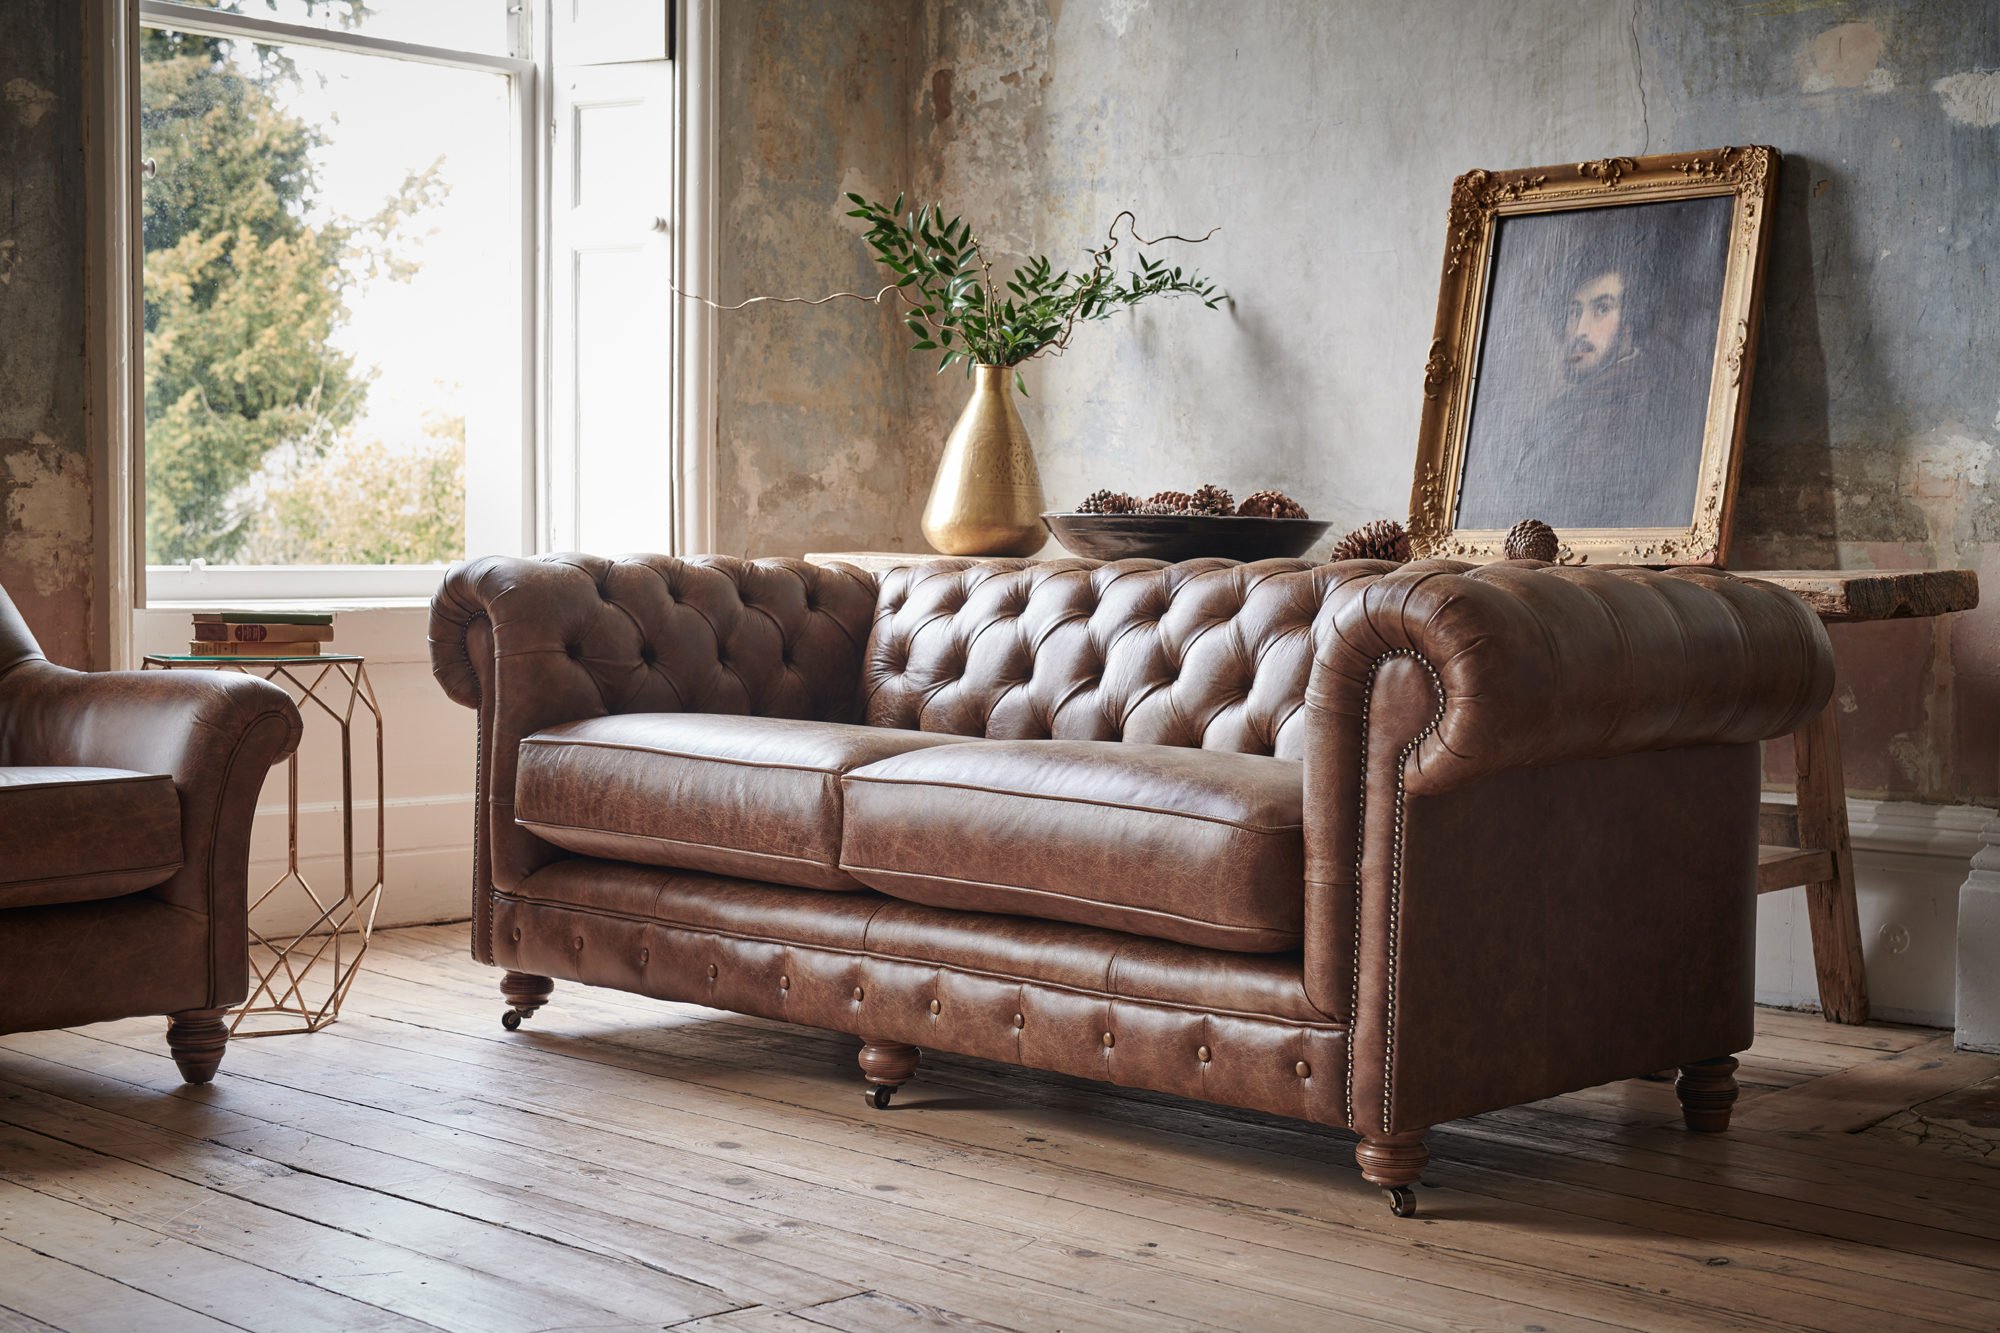 Chesterfield Leather Sofa, Are Chesterfield Sofas Out Of Style